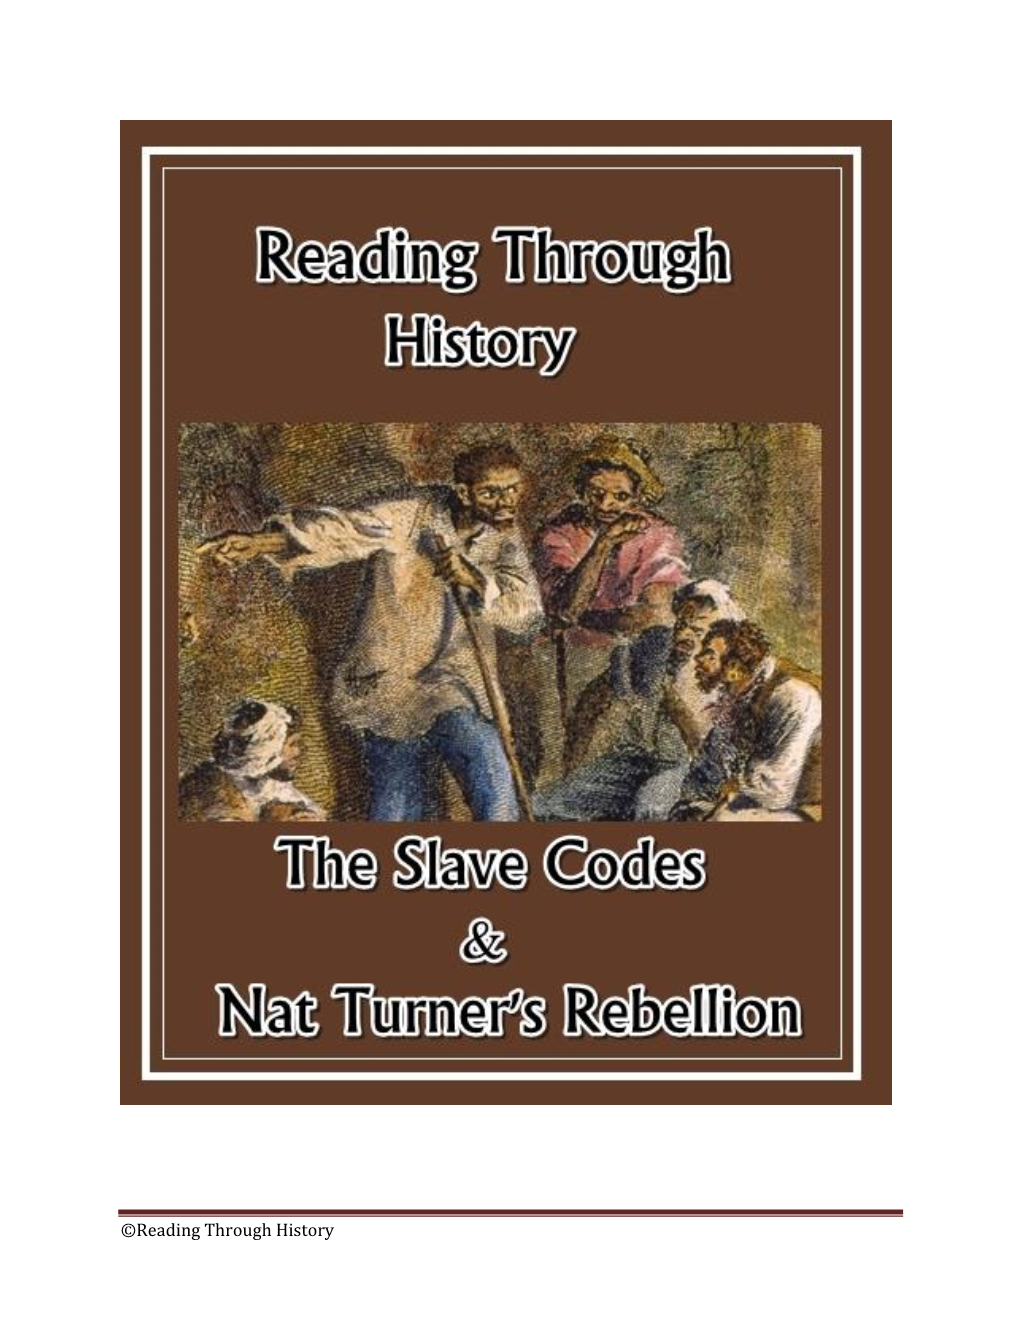 This Item Is a Digital Download from the Reading Through History Tpt Store At